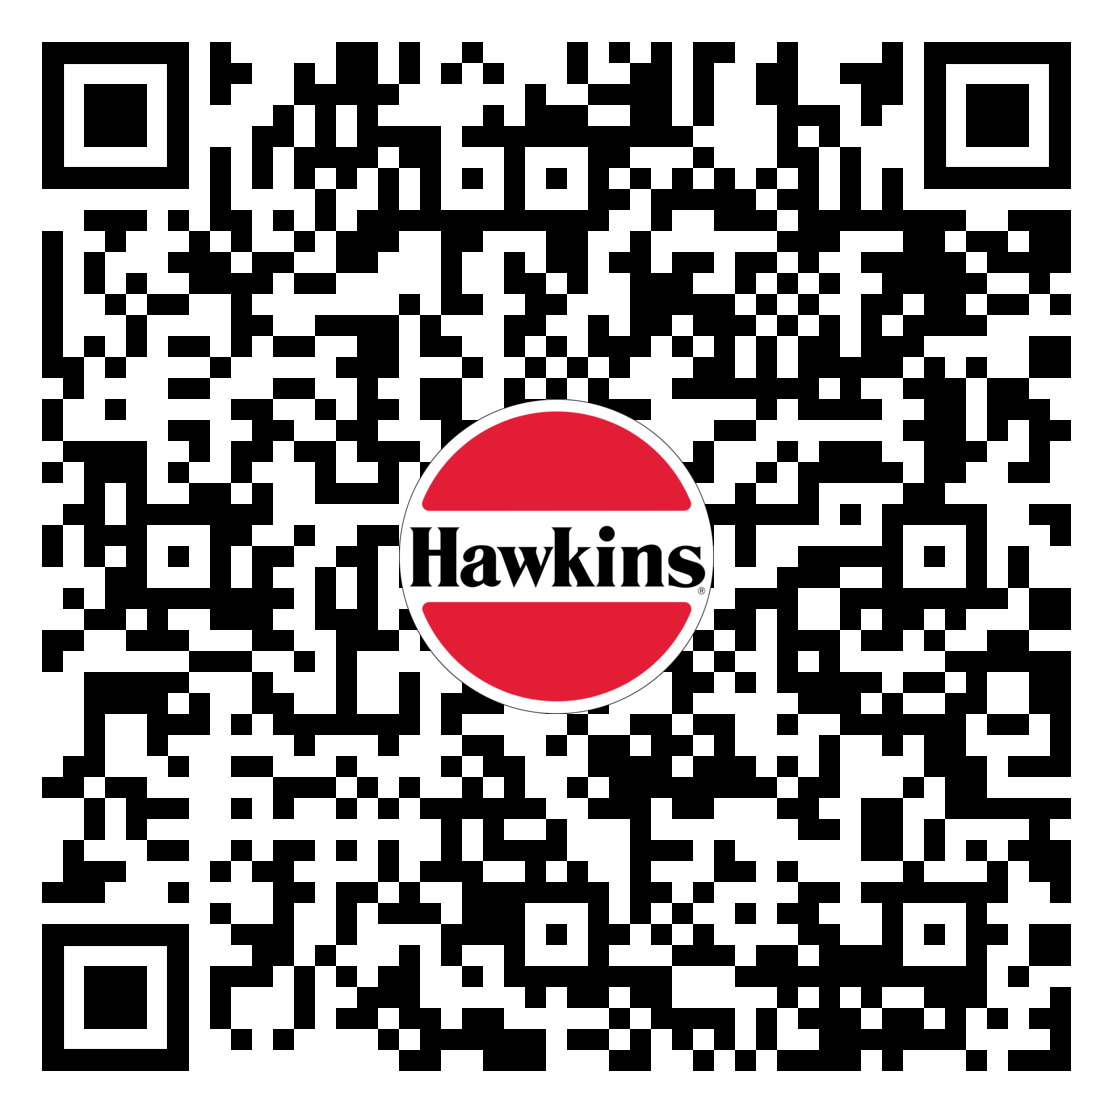 Hawkins Cookers Limited